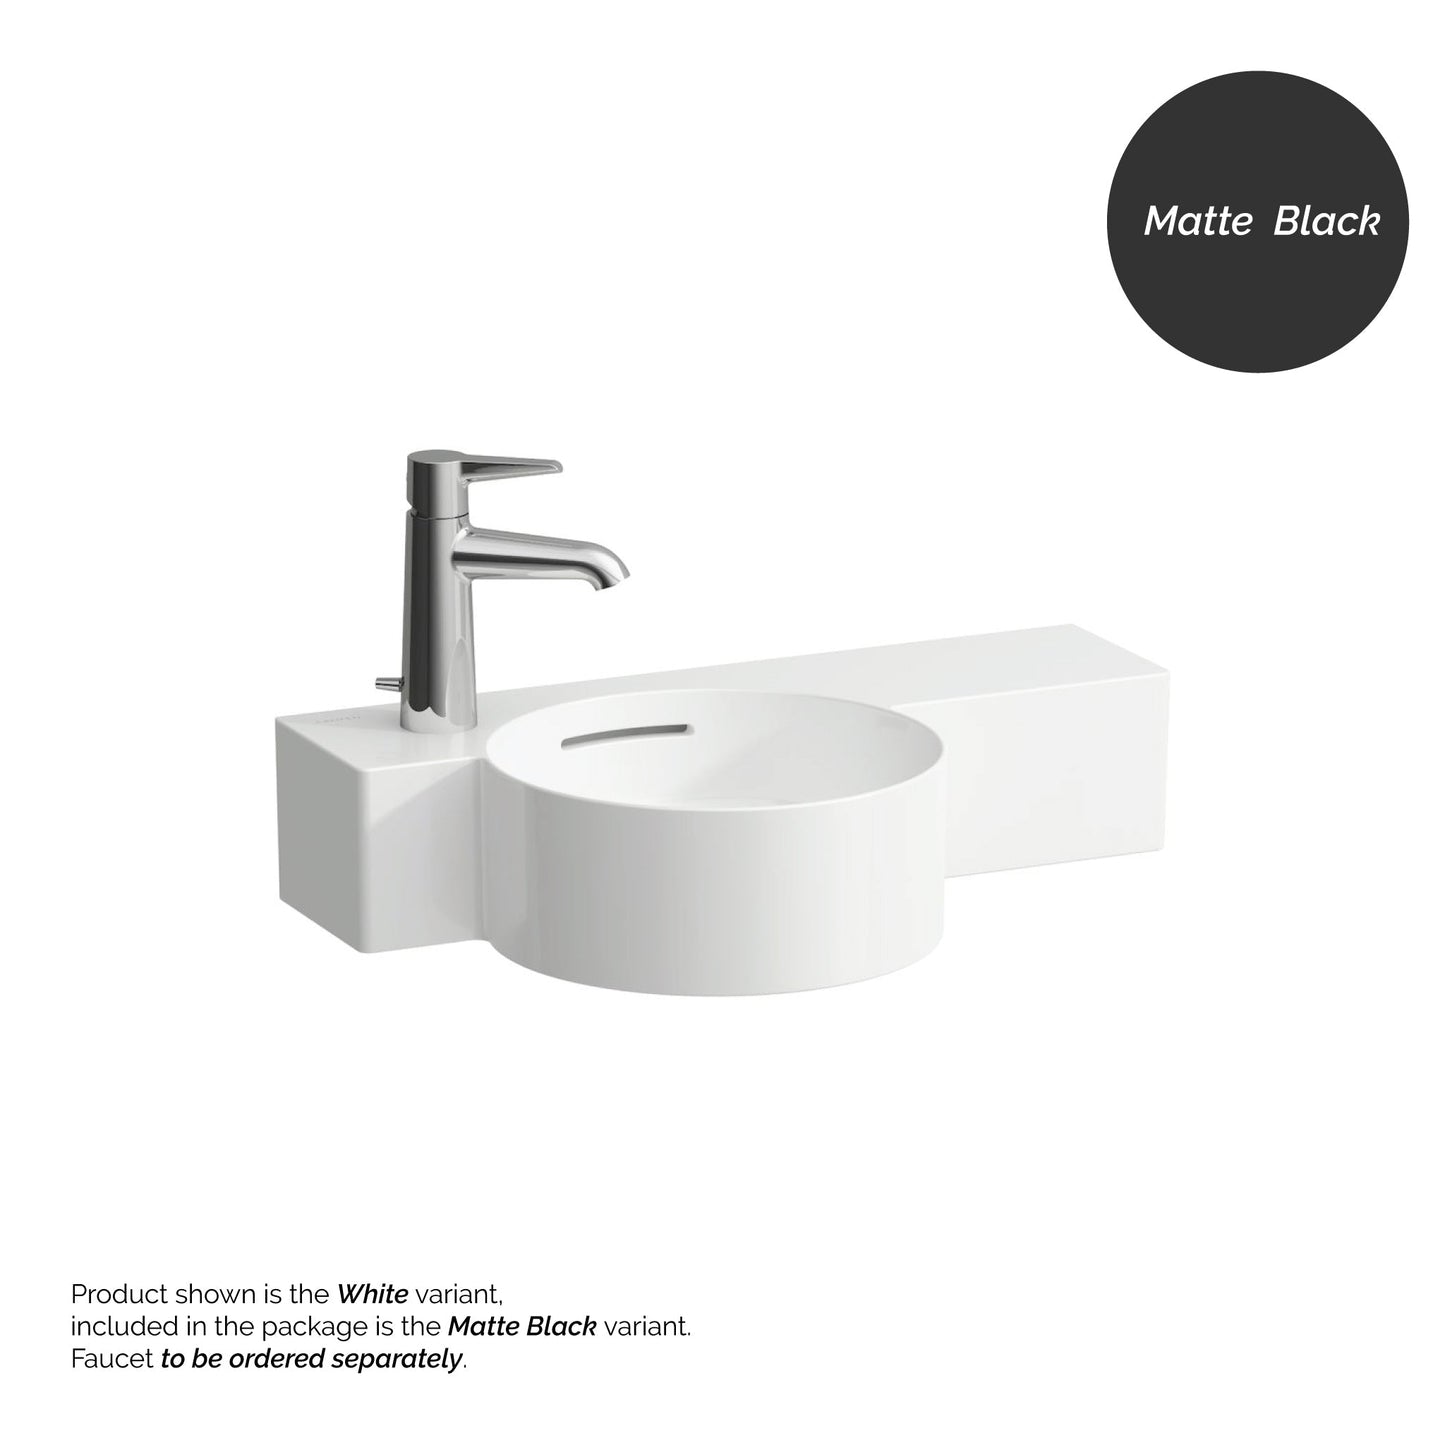 Laufen Val 22" x 12" Matte Black Wall-Mounted Shelf-Right Bathroom Sink With Faucet Hole on the Left